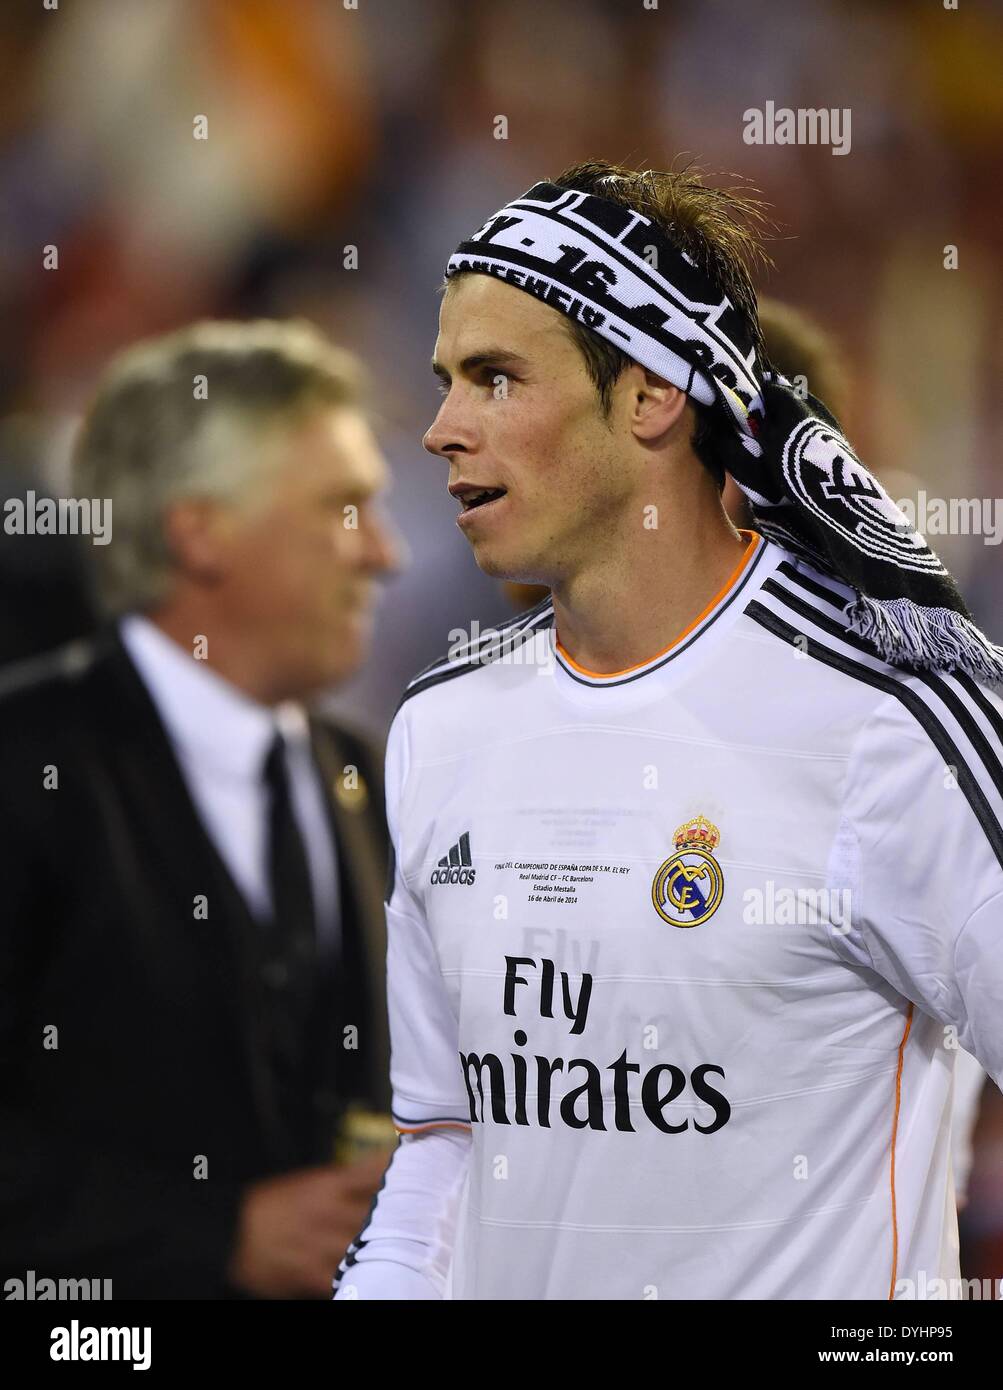 Mestalla, Valencia, Spain. 16th Apr, 2014. Copa Del Rey Cup final. Barcelona versus Real Madrid. Gareth Bale (Real Madrid) with the team scarf on his forehead © Action Plus Sports/Alamy Live News Stock Photo